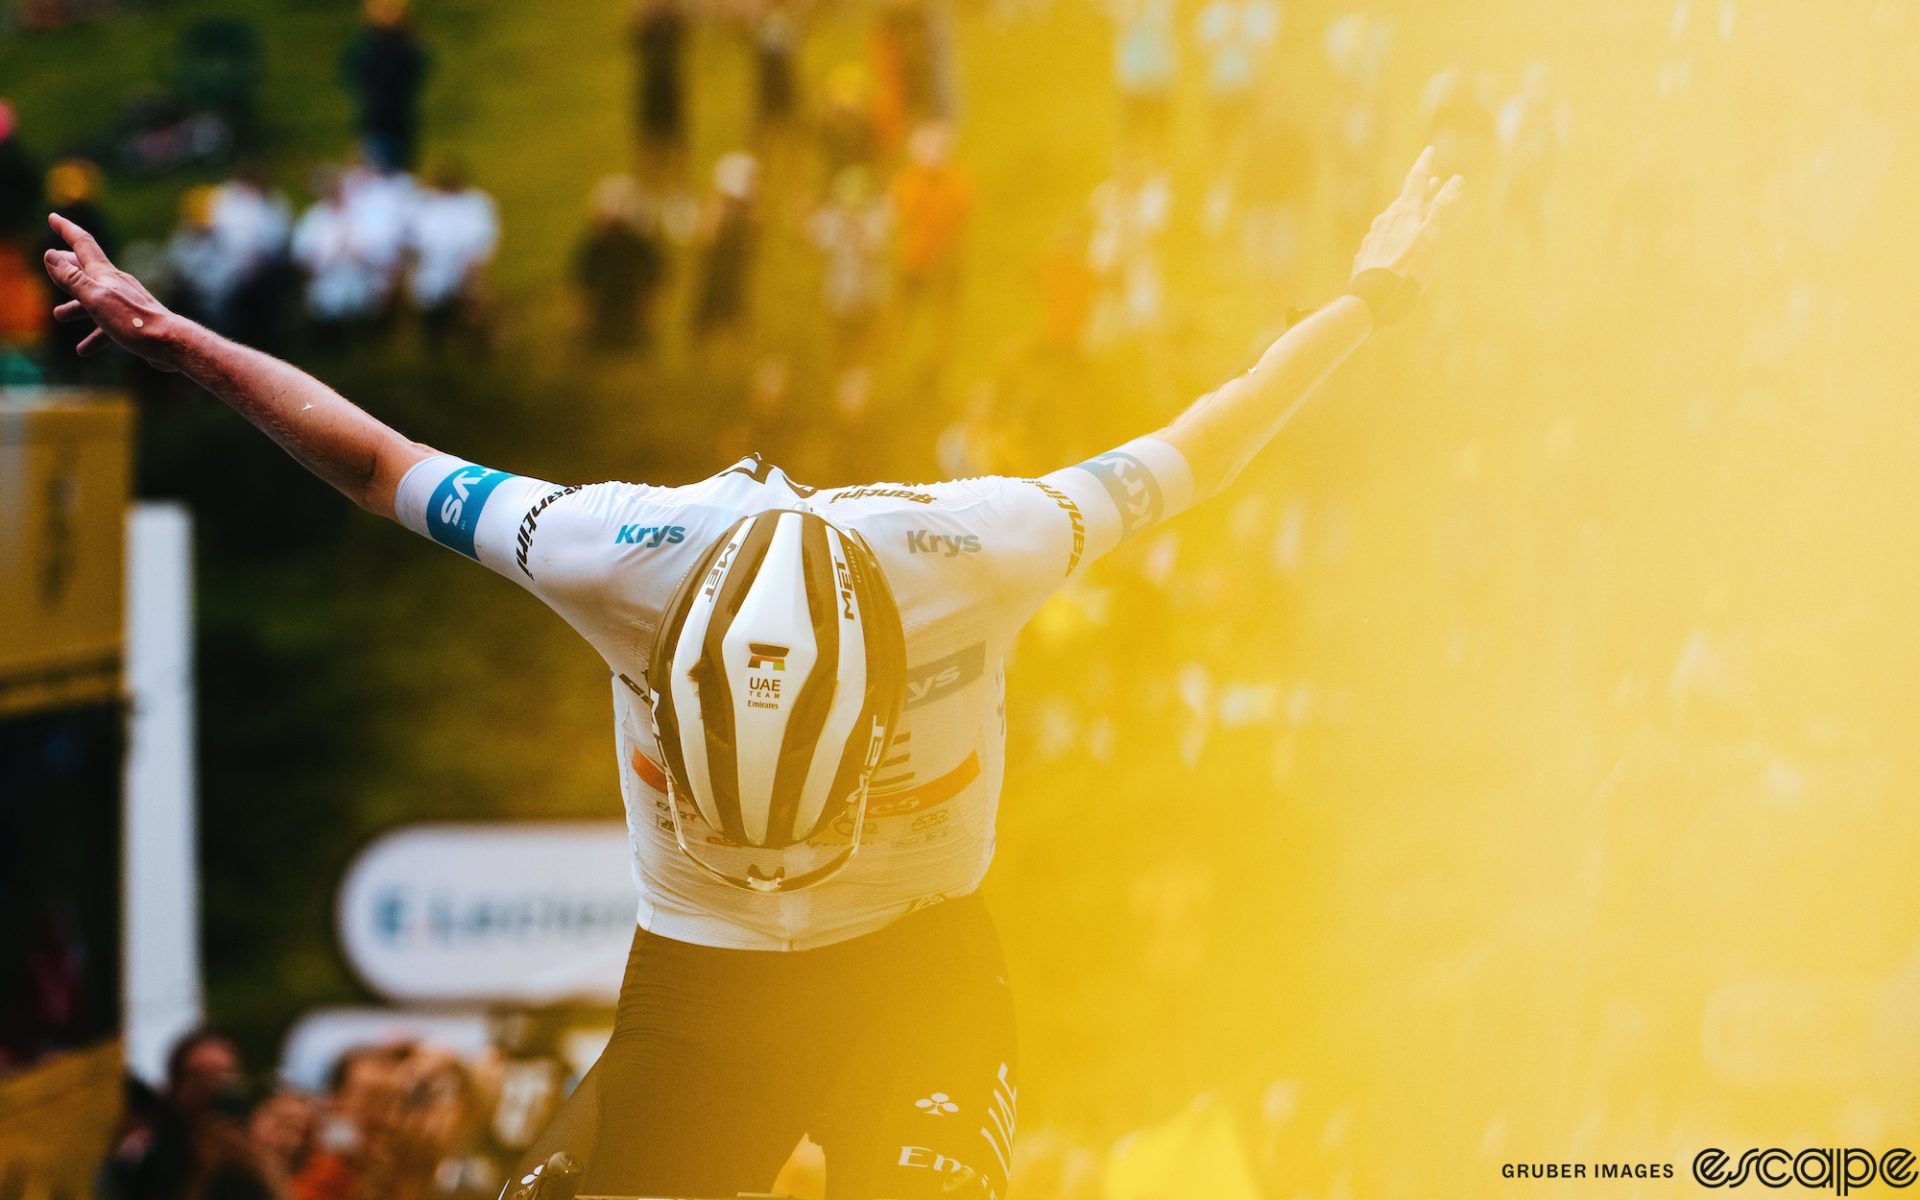 Tadej Pogačar takes a bow as he crosses the finish line to win stage 6 of the 2023 Tour de France. The image has a slight yellow flare on the right half, as if to foreshadow a yellow jersey.